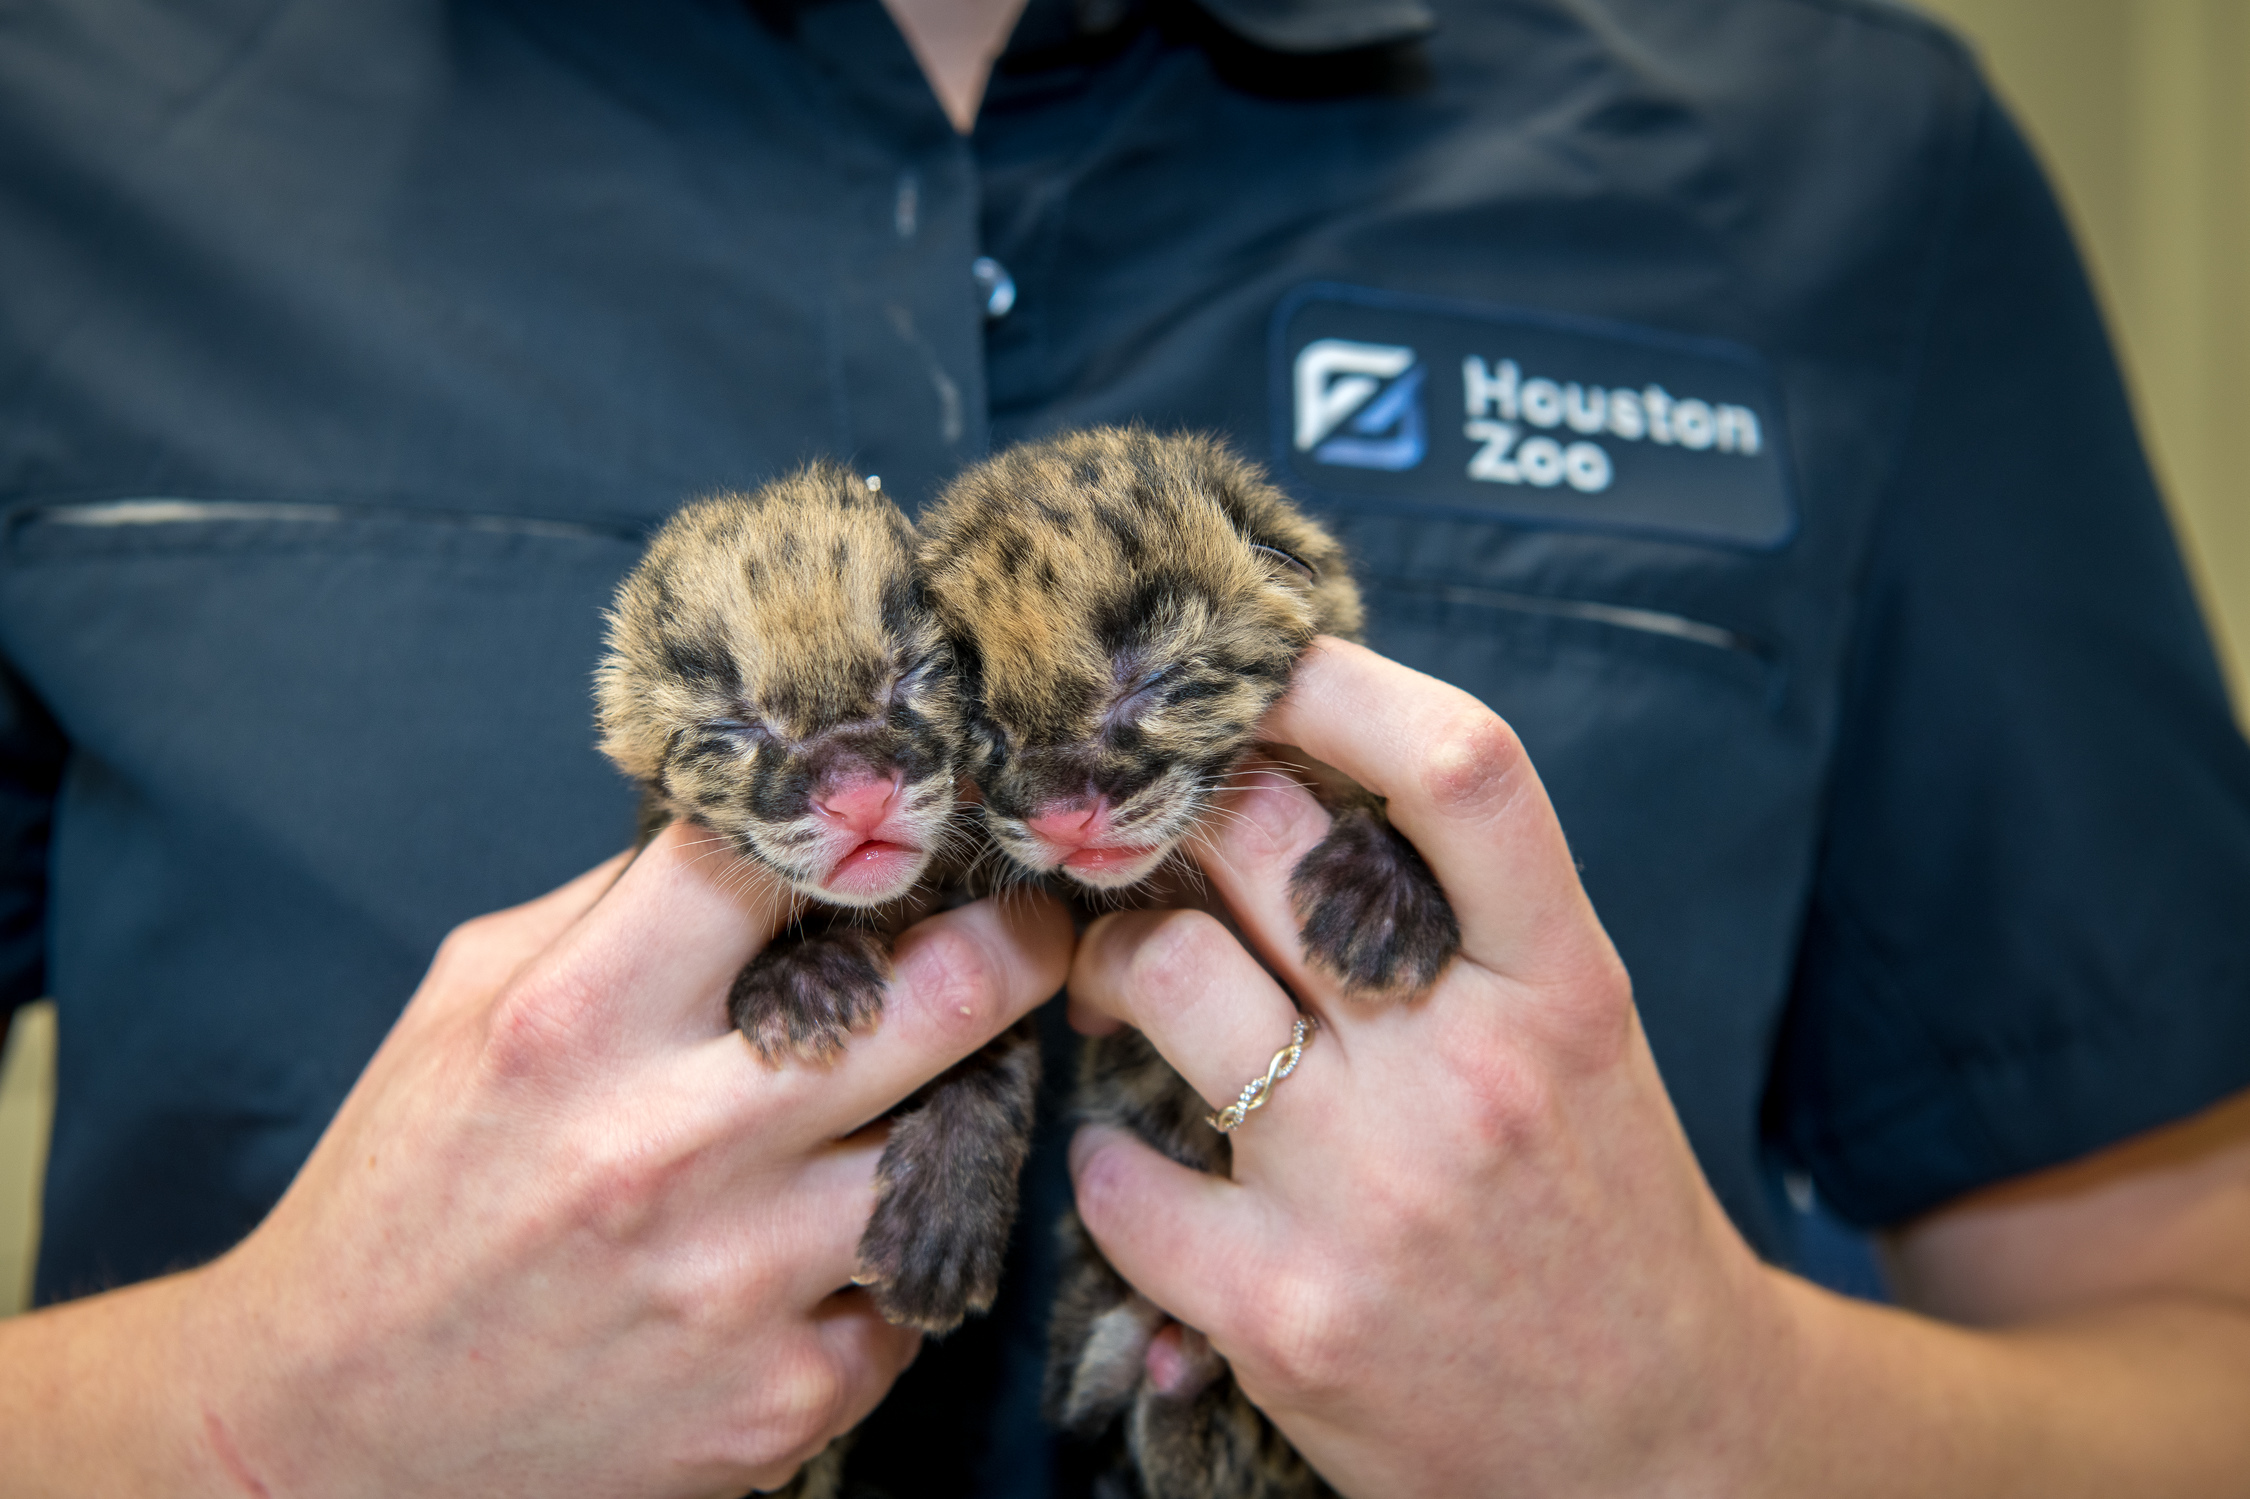 New Pair of Clouded Leopards Born at the Zoo! The